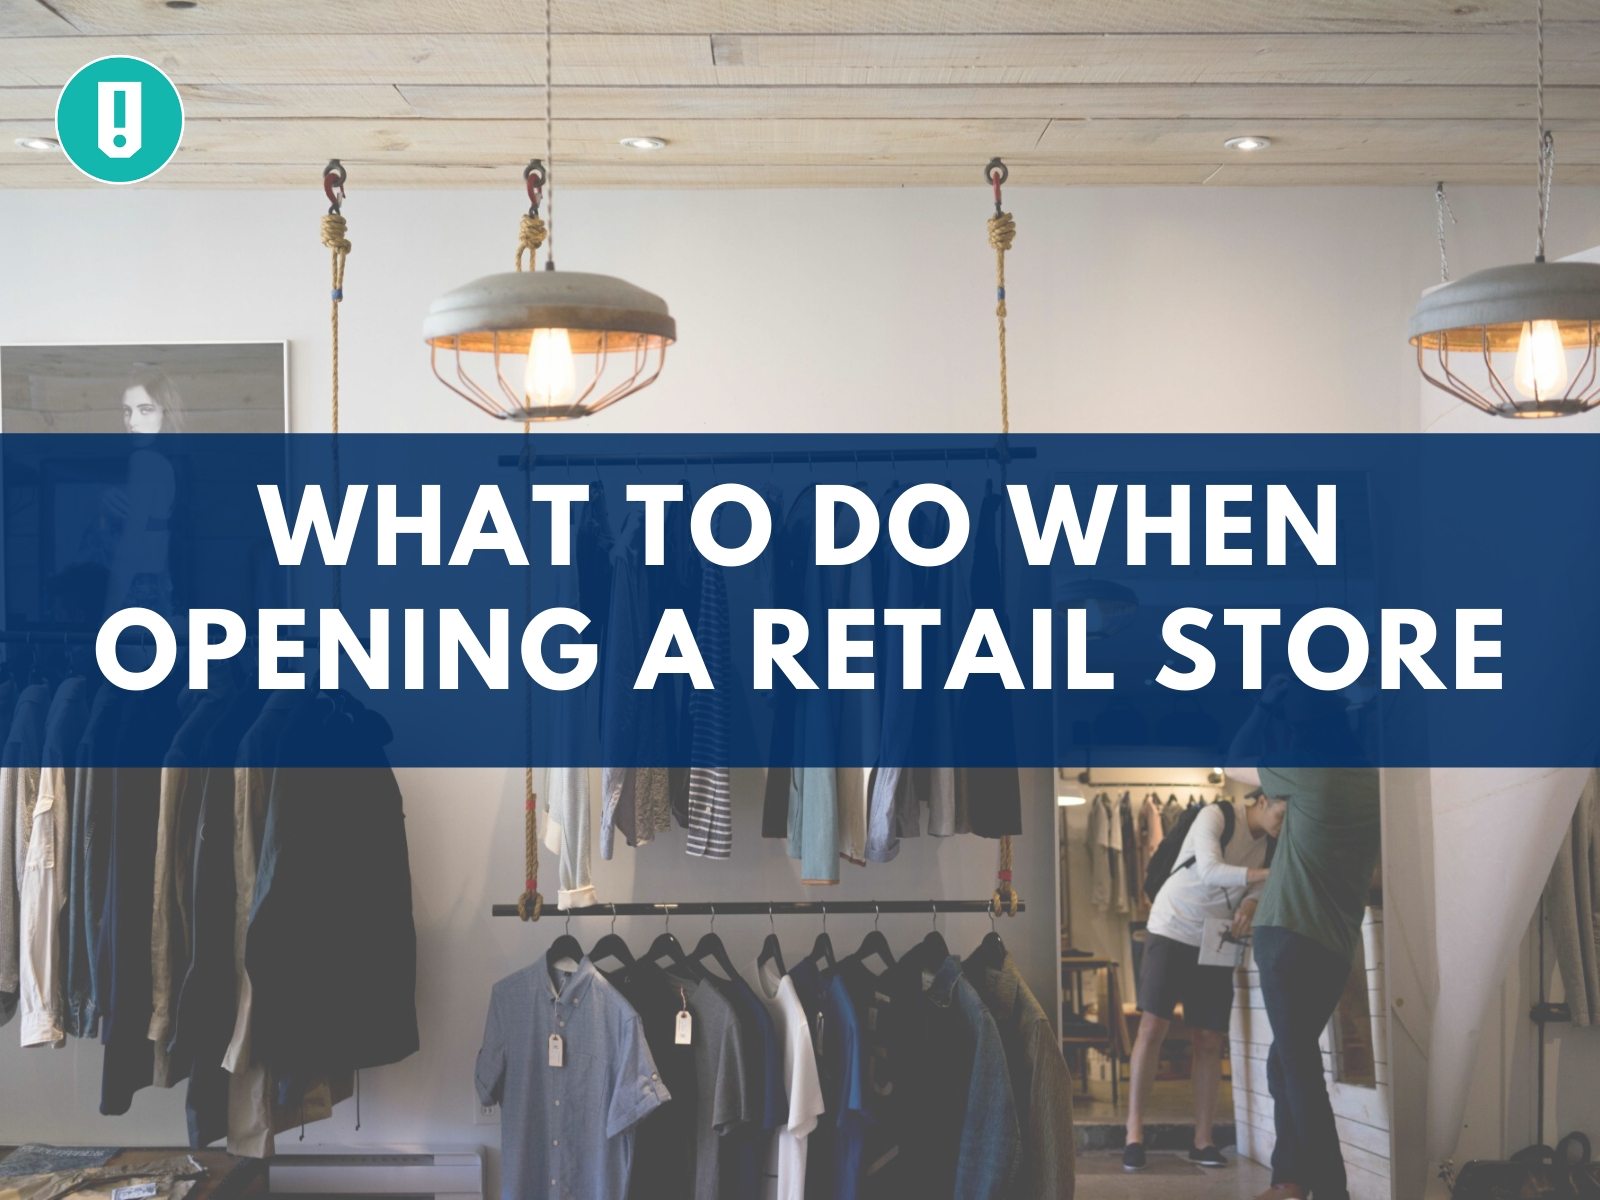 What to Do When Opening a Retail Store